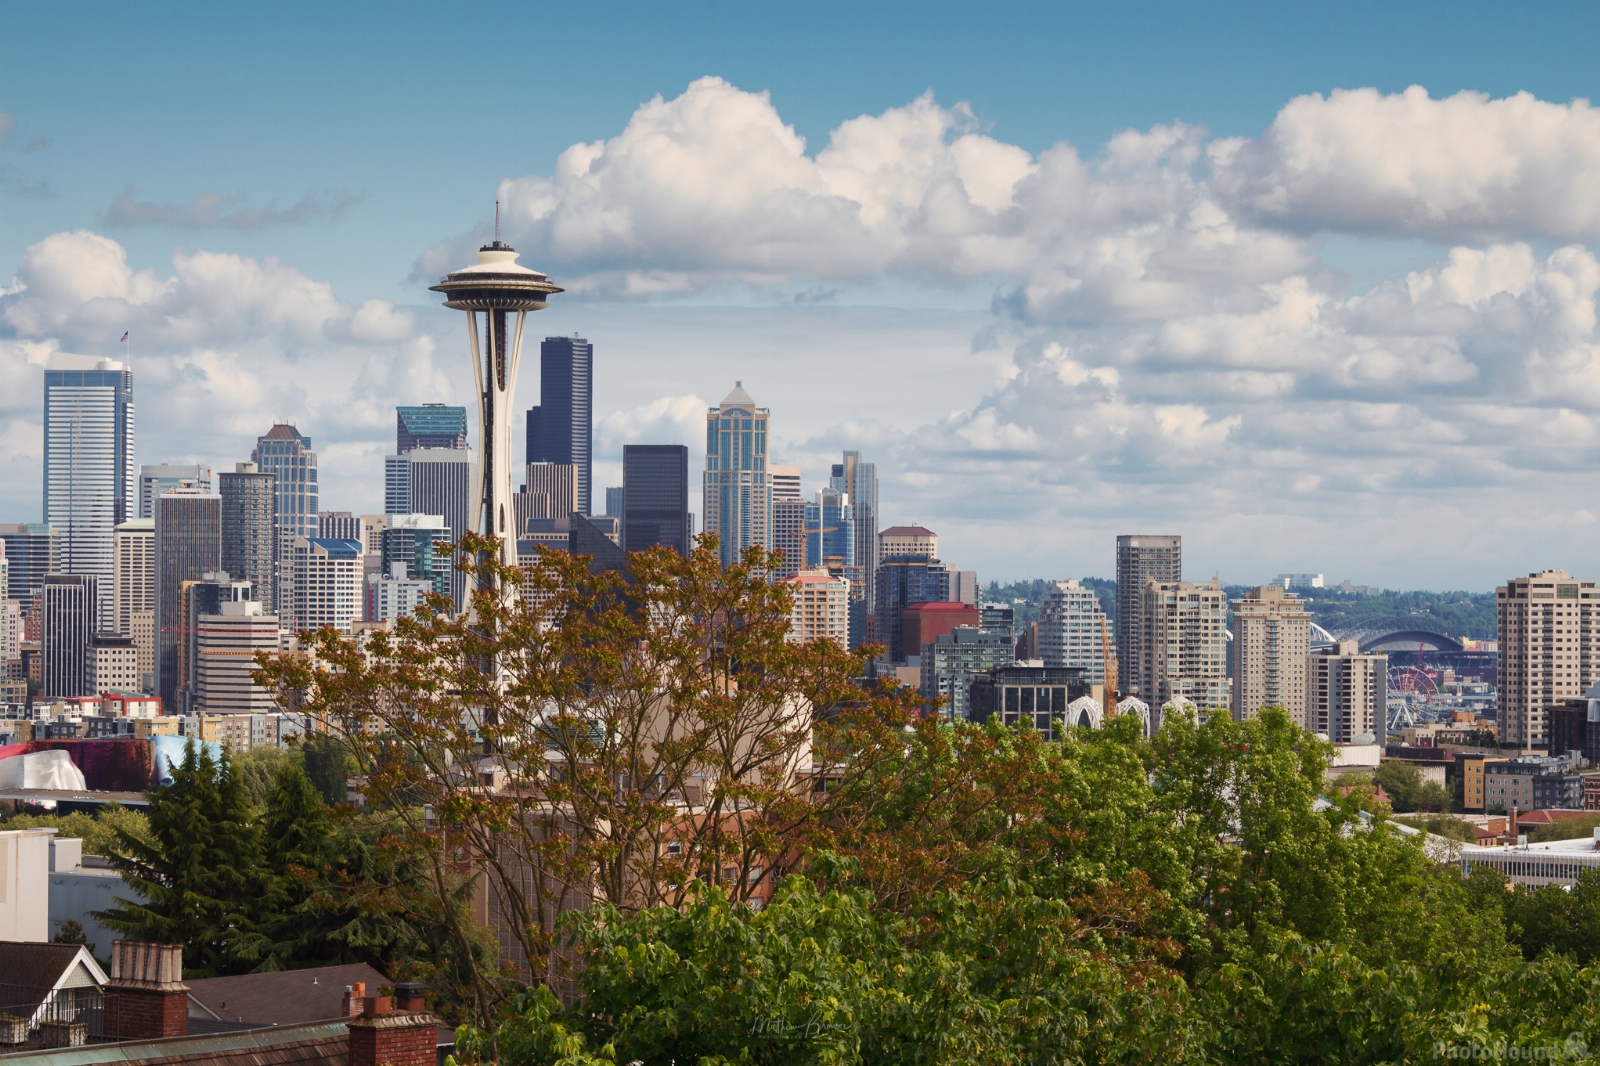 Image of Kerry Park by Mathew Browne